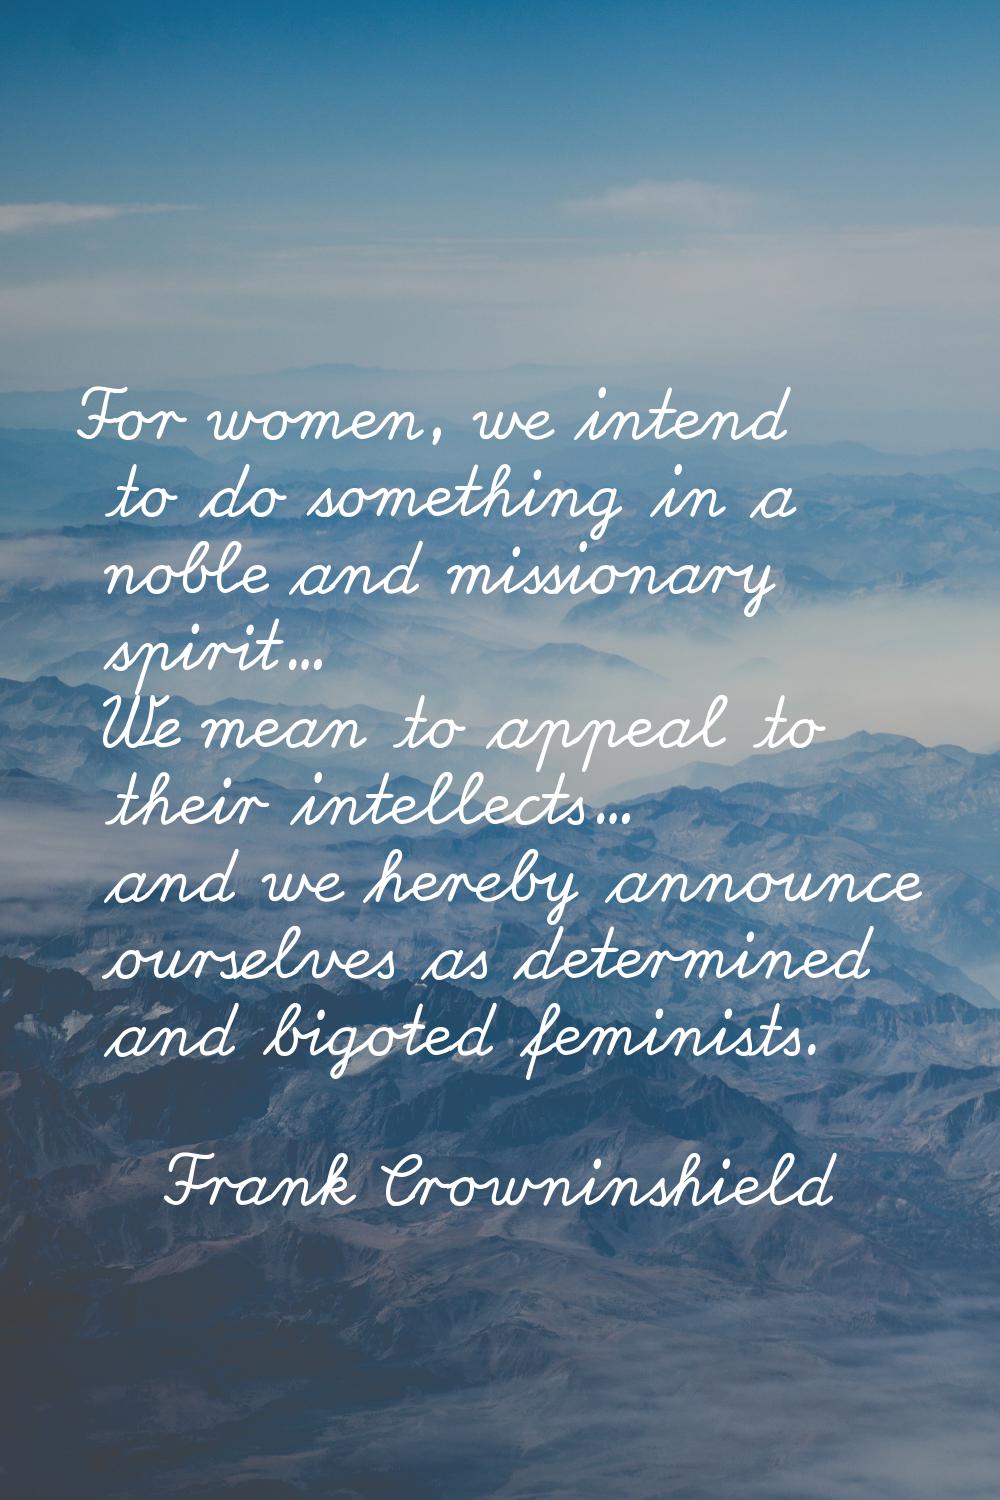 For women, we intend to do something in a noble and missionary spirit... We mean to appeal to their